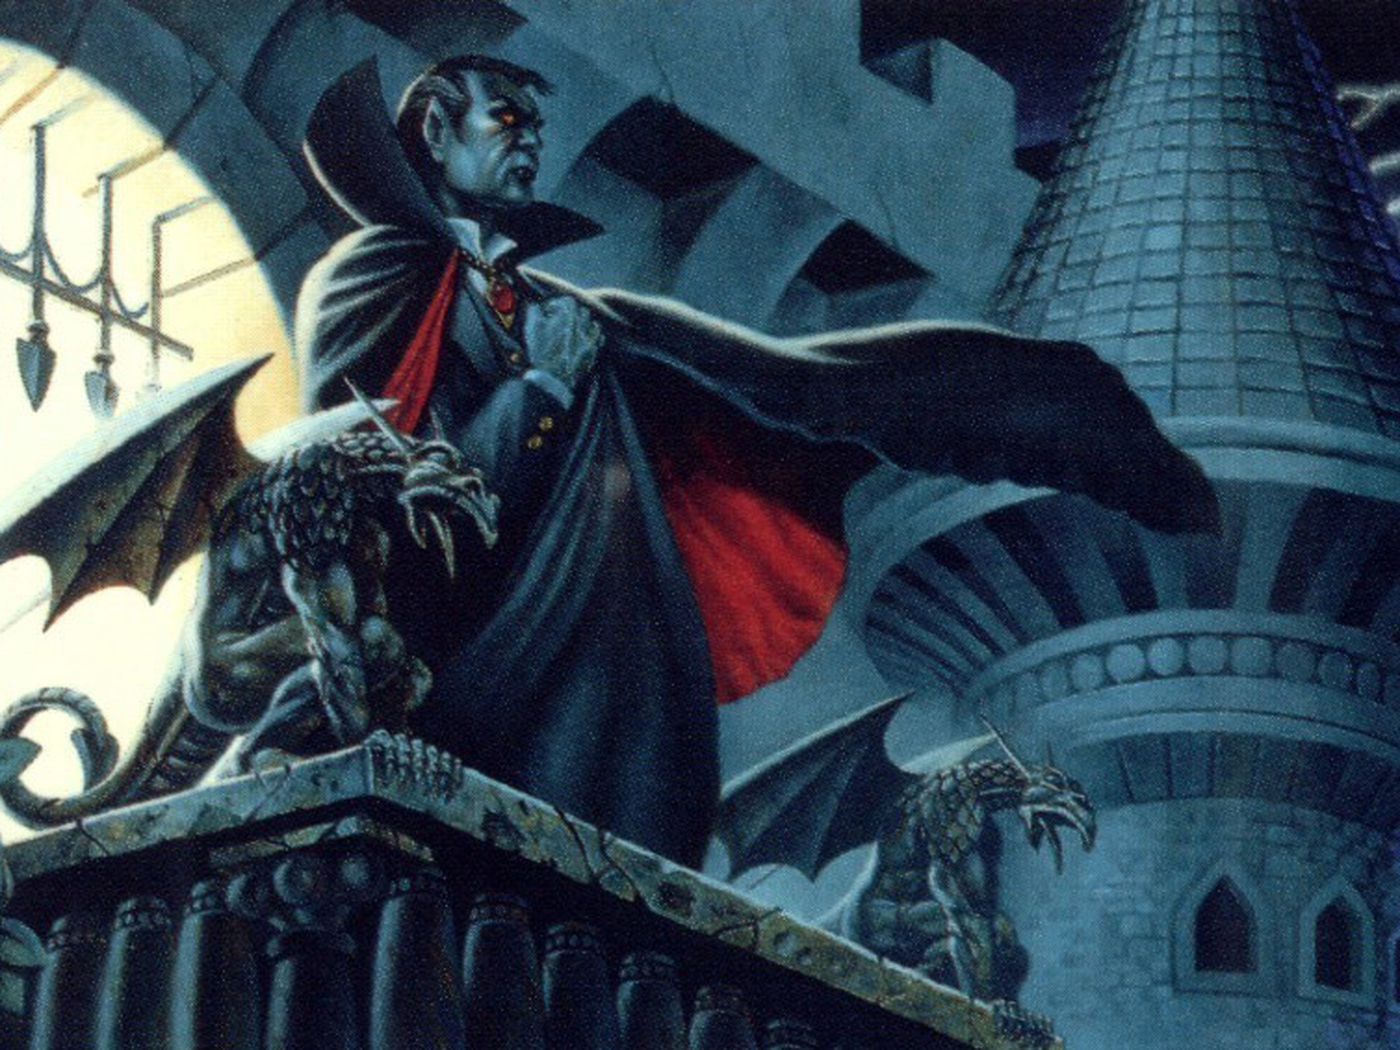 D&D's Curse of Strahd campaign is getting two extravagant new repr...